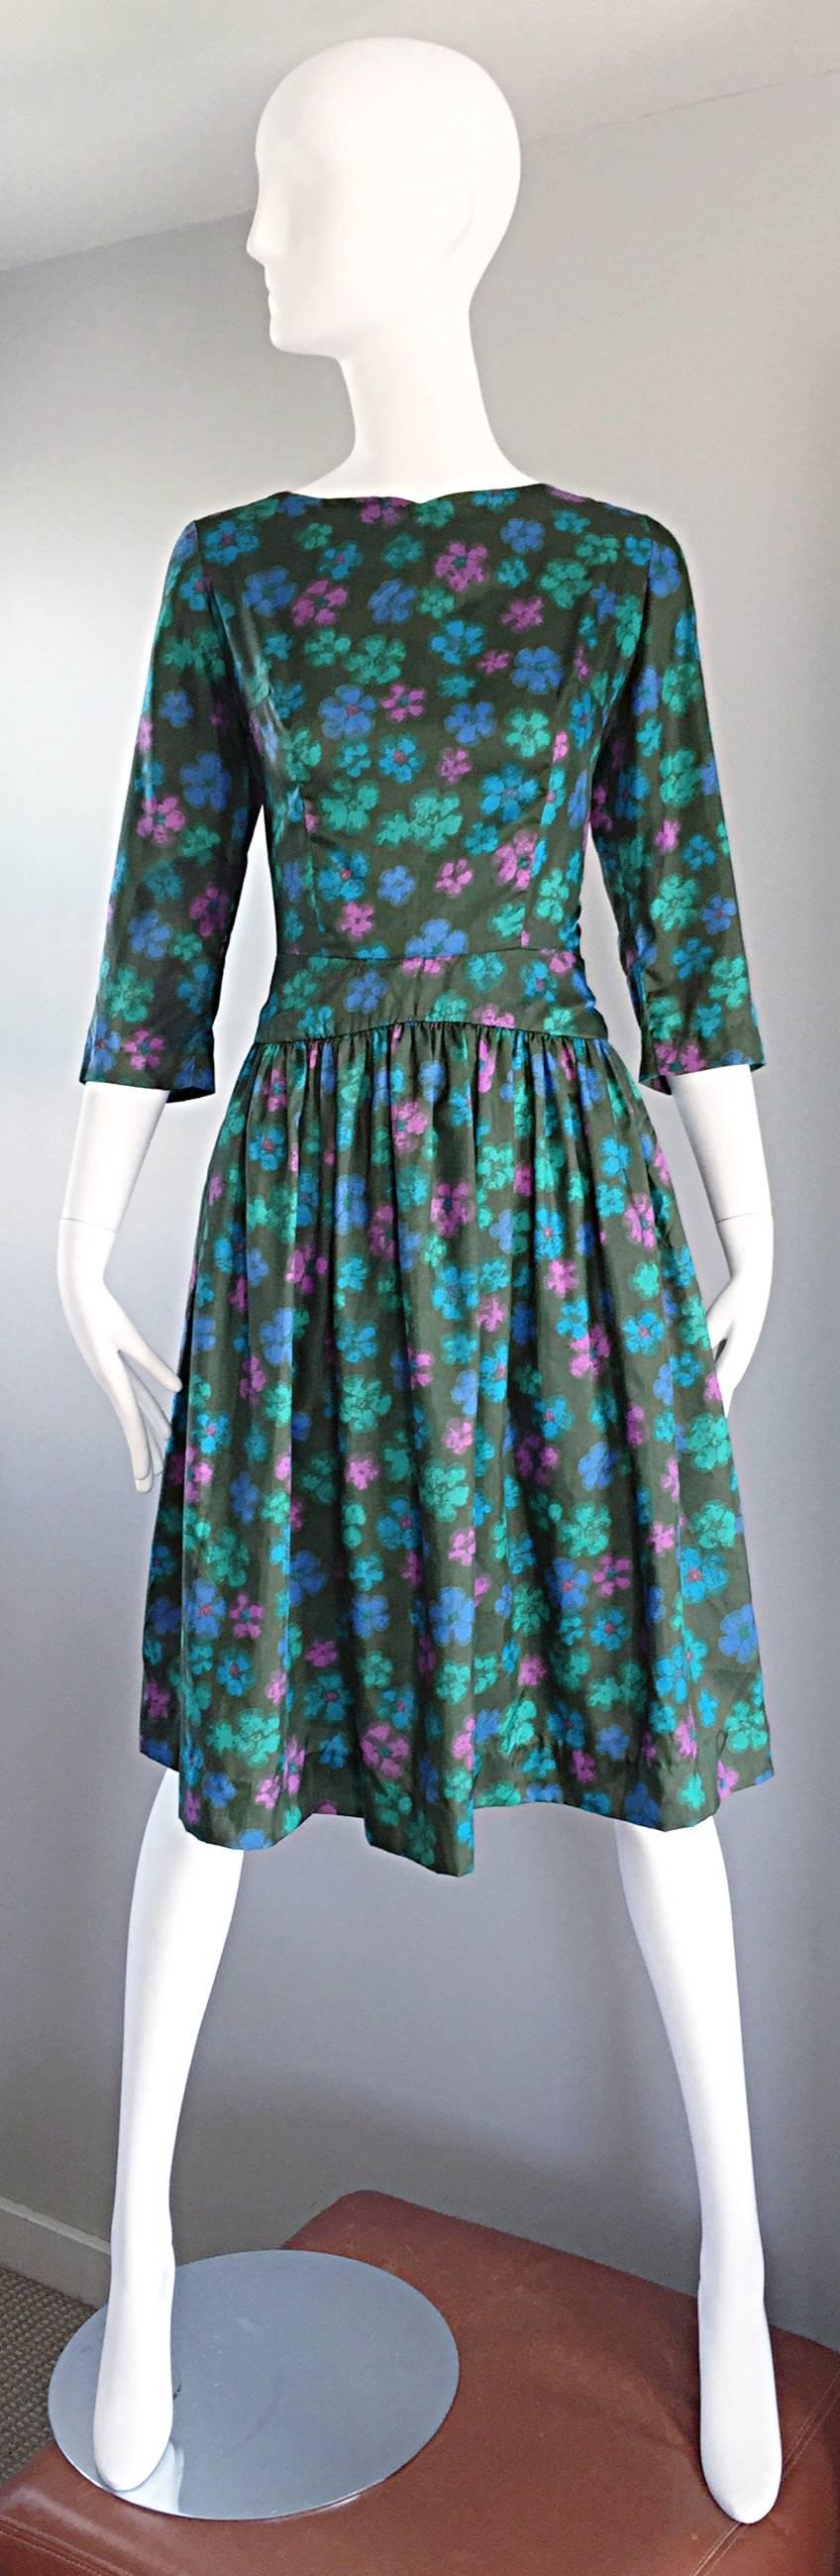 Beautiful vintage 1950s 50s rare dress designed by baseball great Leo Durocher's second wife, Grace Dozier Durocher, for CAROLE KING! Luxurious dark green silk, with screen printed watercolor flowers in pink, blue, and teal green. Impeccable